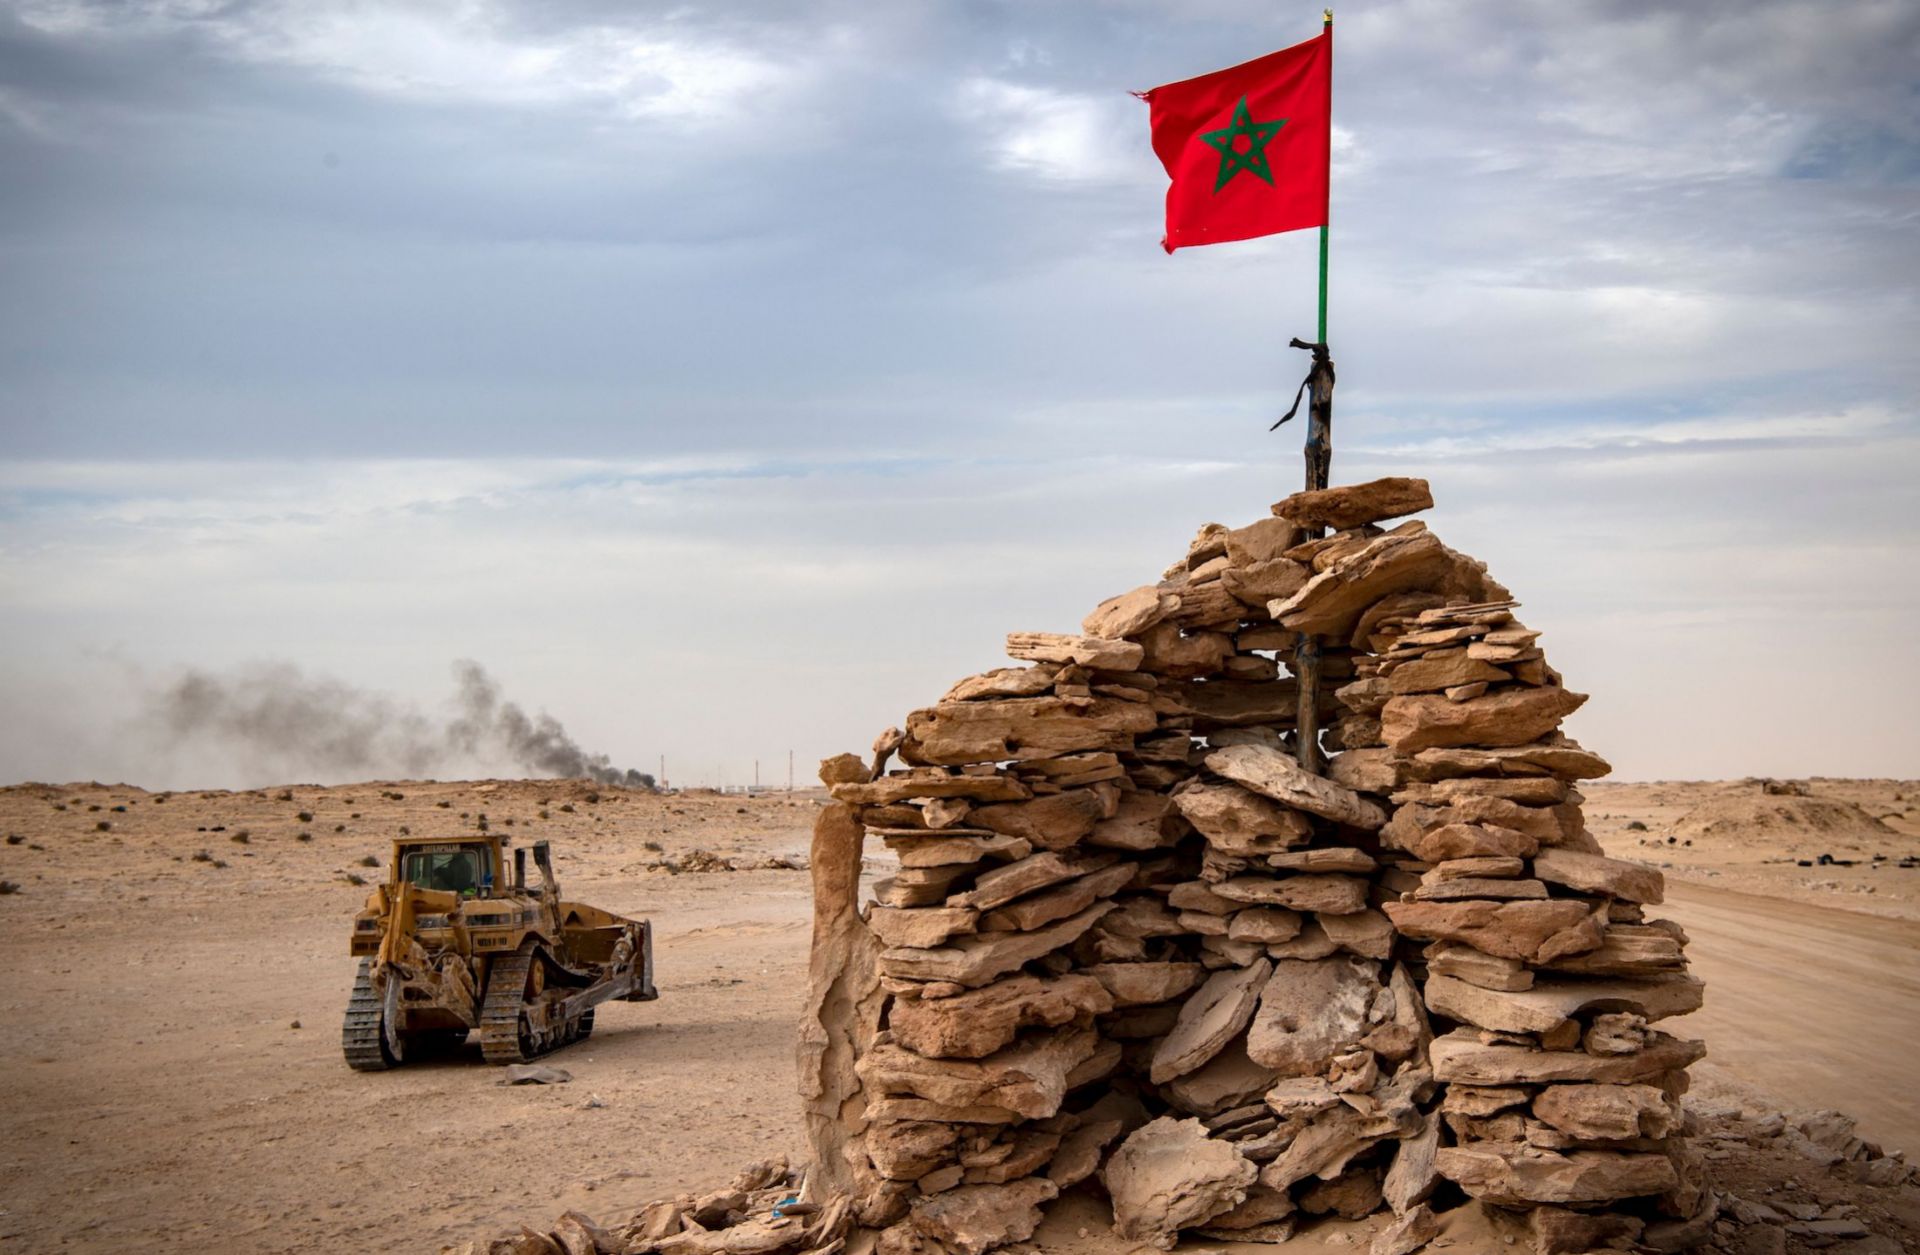 A bulldozer passes by a hilltop manned by Moroccan soldiers in Western Sahara on Nov. 23, 2020.